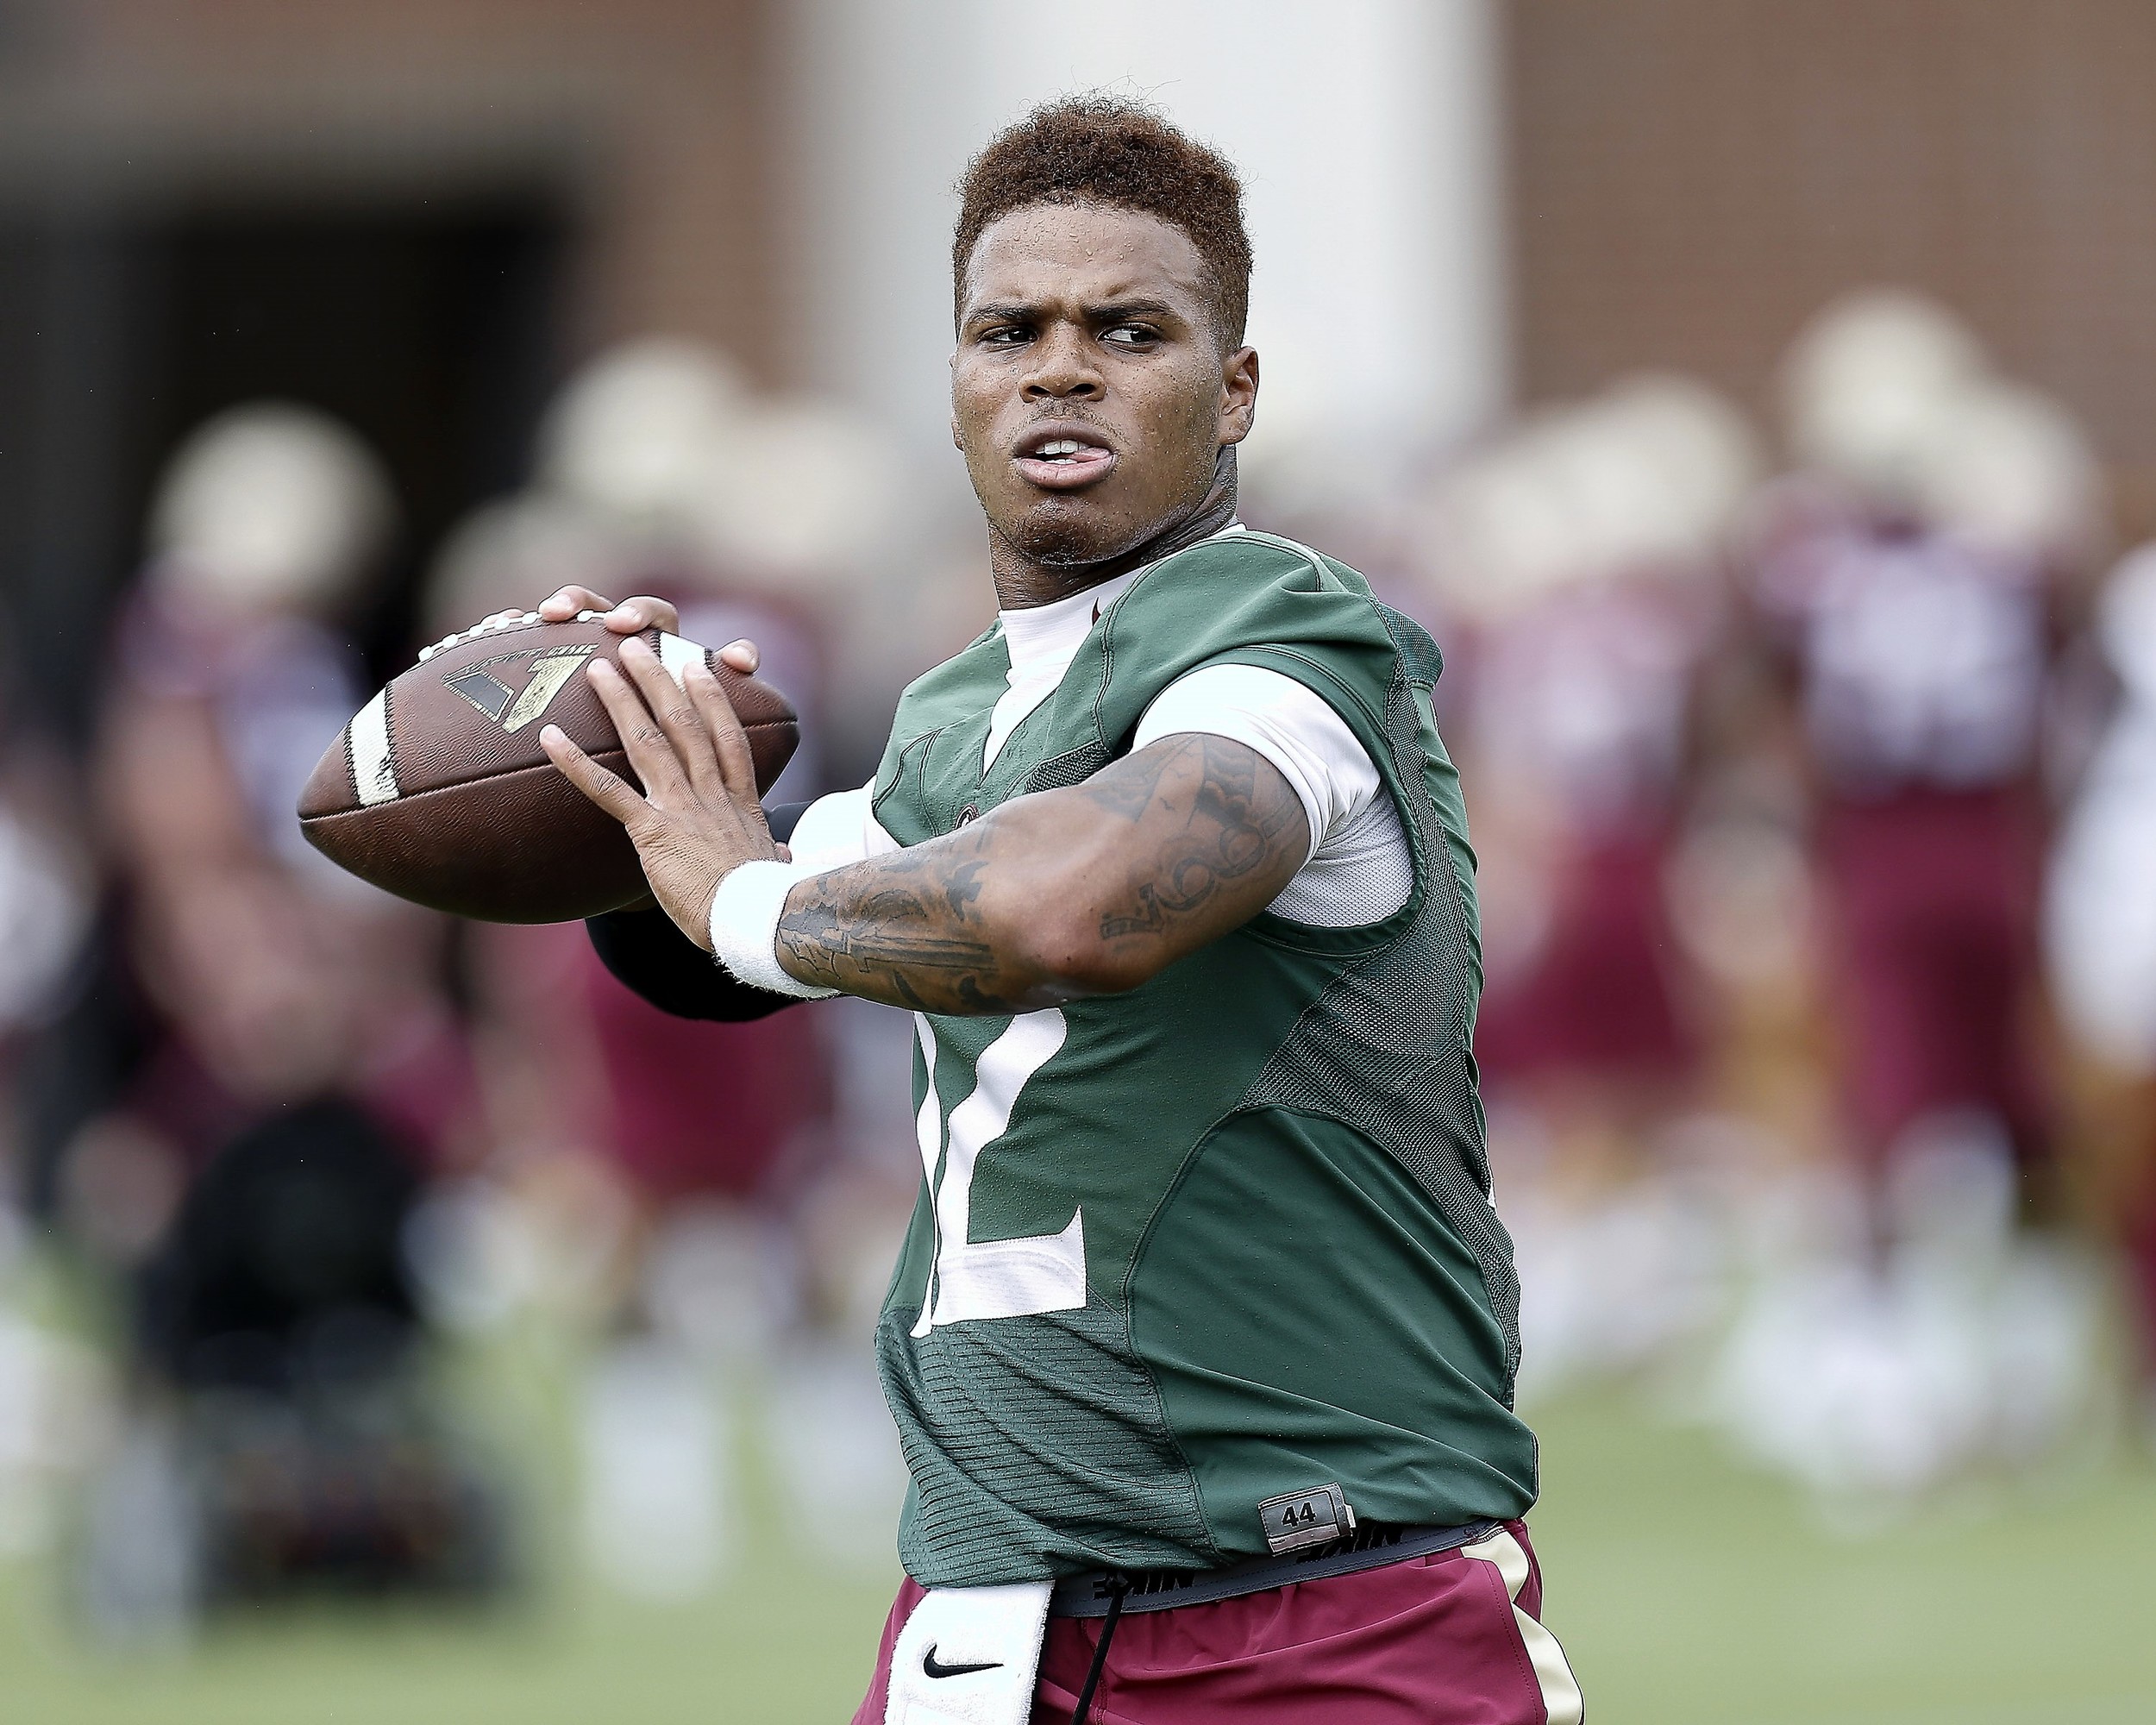 FSU redshirt freshman Deondre Francois has been handling first-team practice reps at QB in preparation for the Sept. 5 season opener against Ole Miss in Orlando. Francois has yet to throw a college pass.